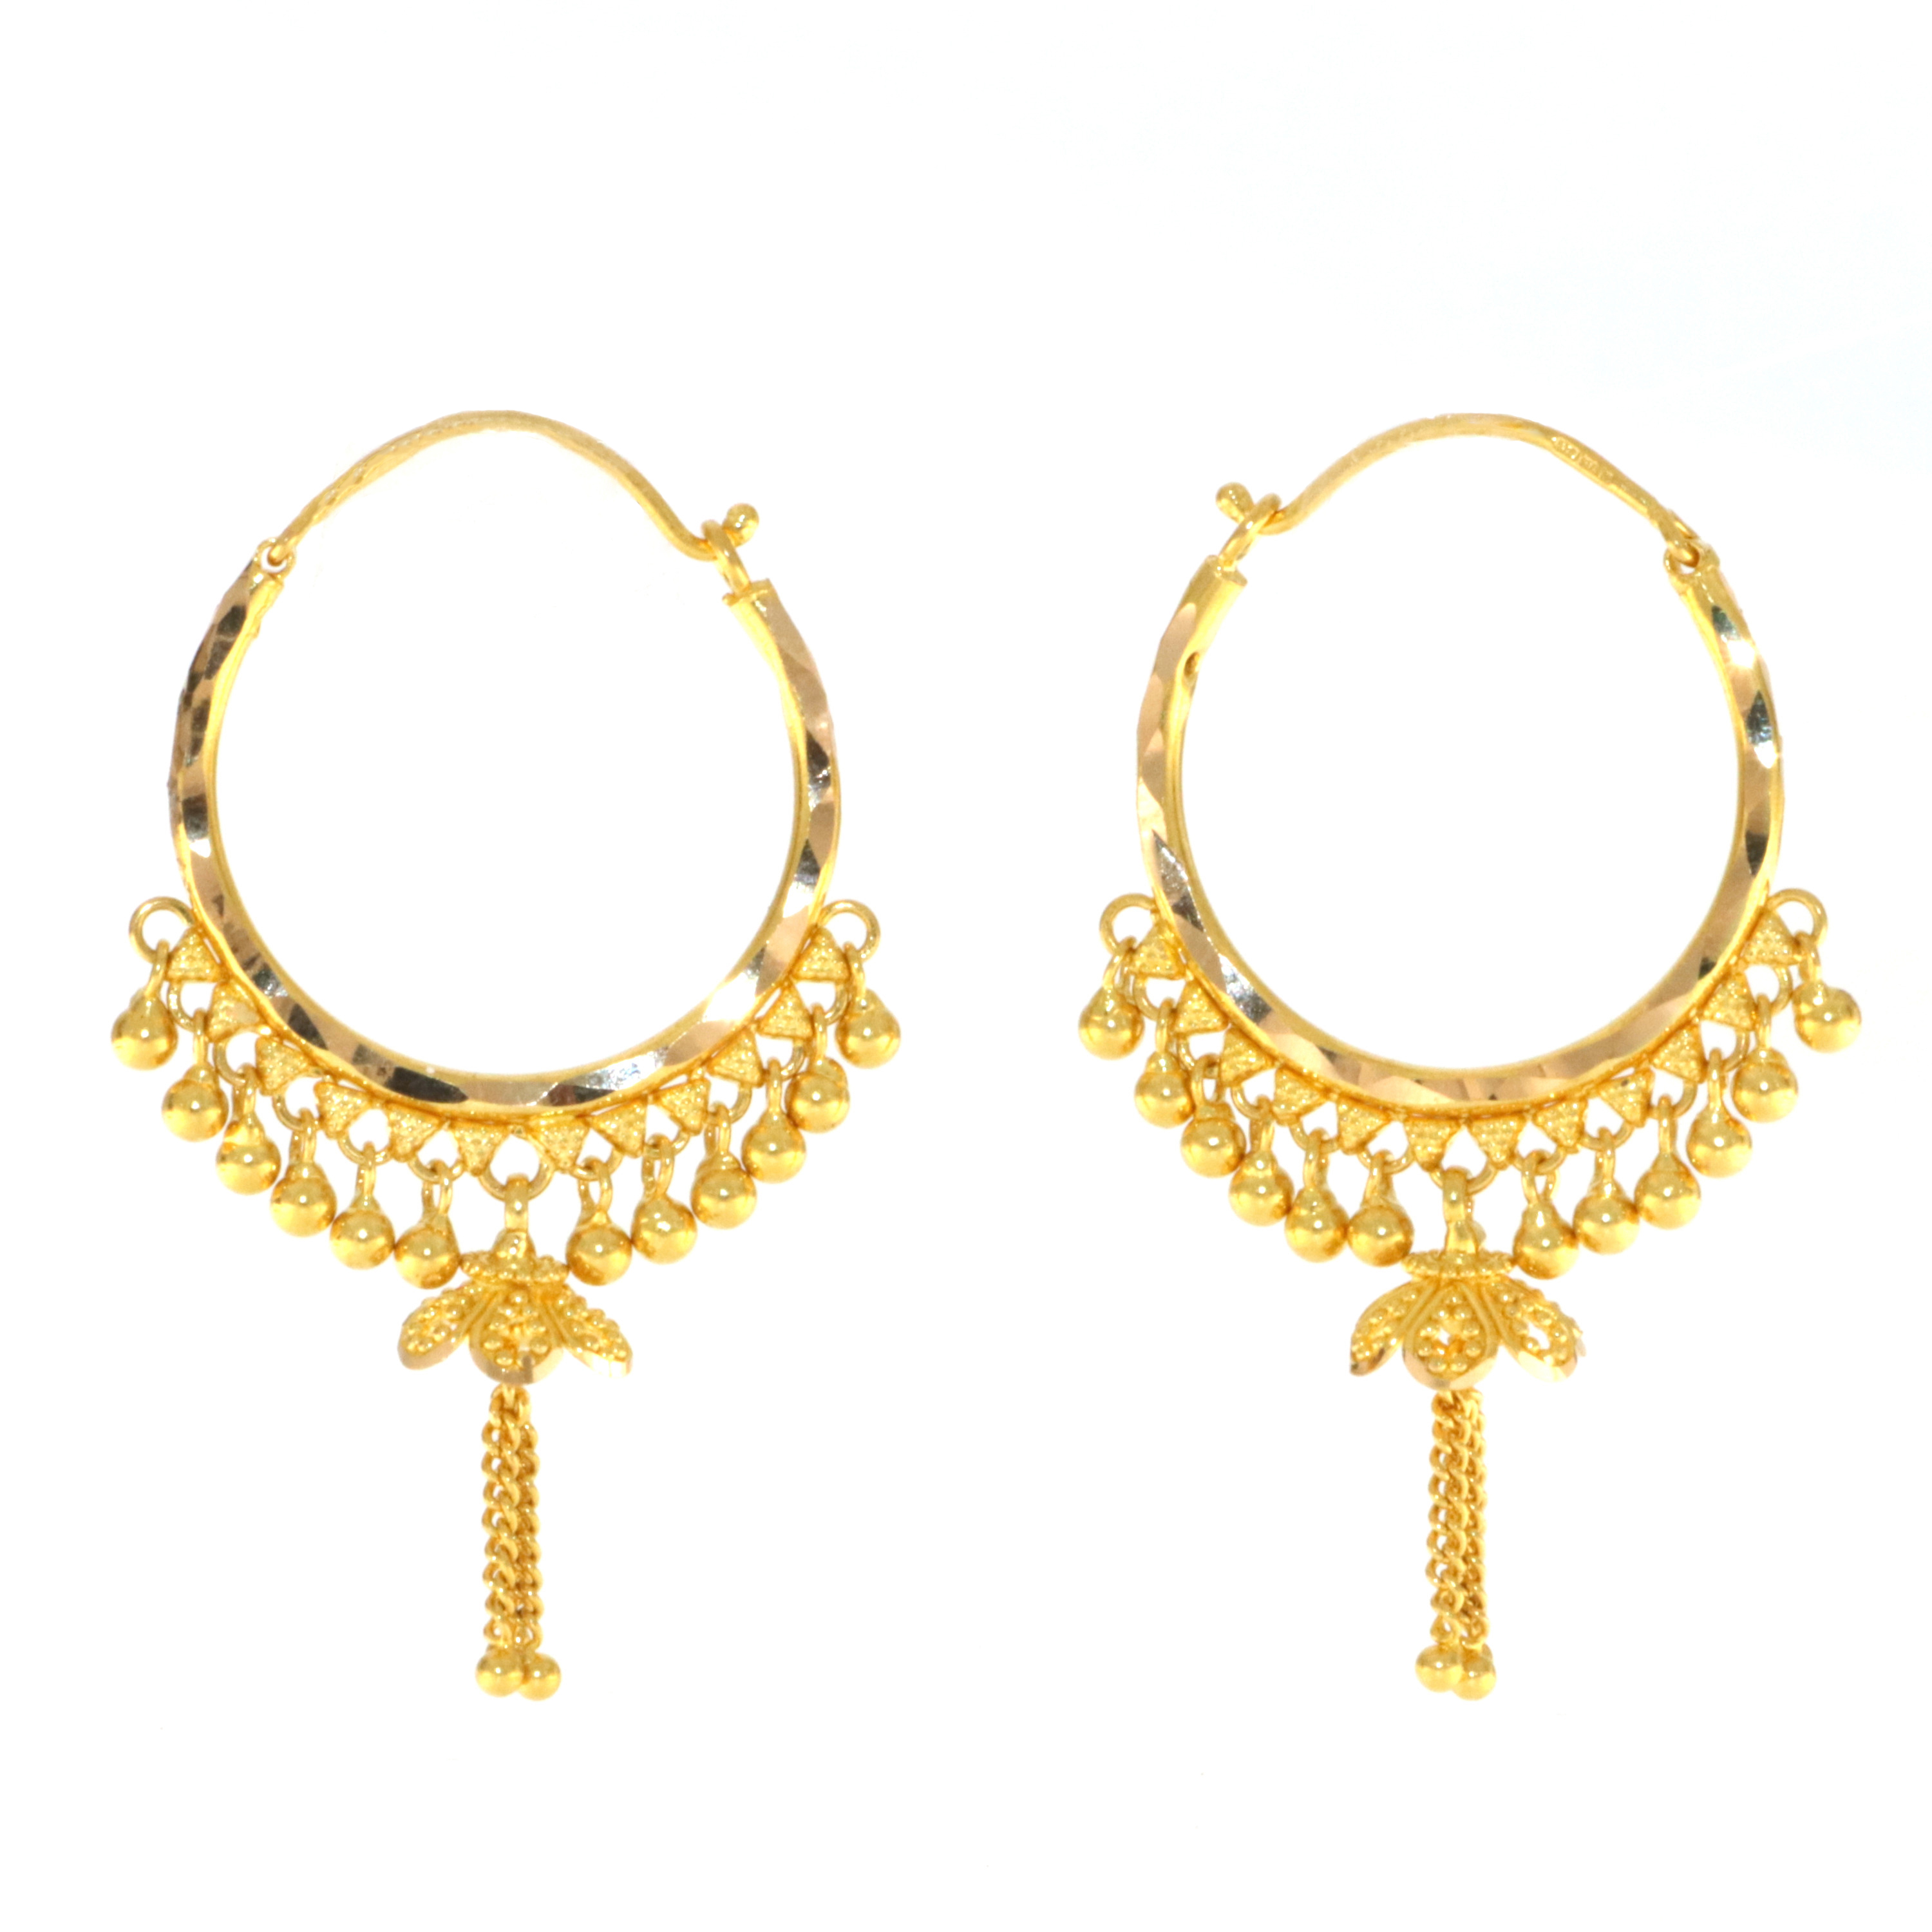 22ct Real Gold Asian/Indian/Pakistani Style Hoop Jhumkay Earrings